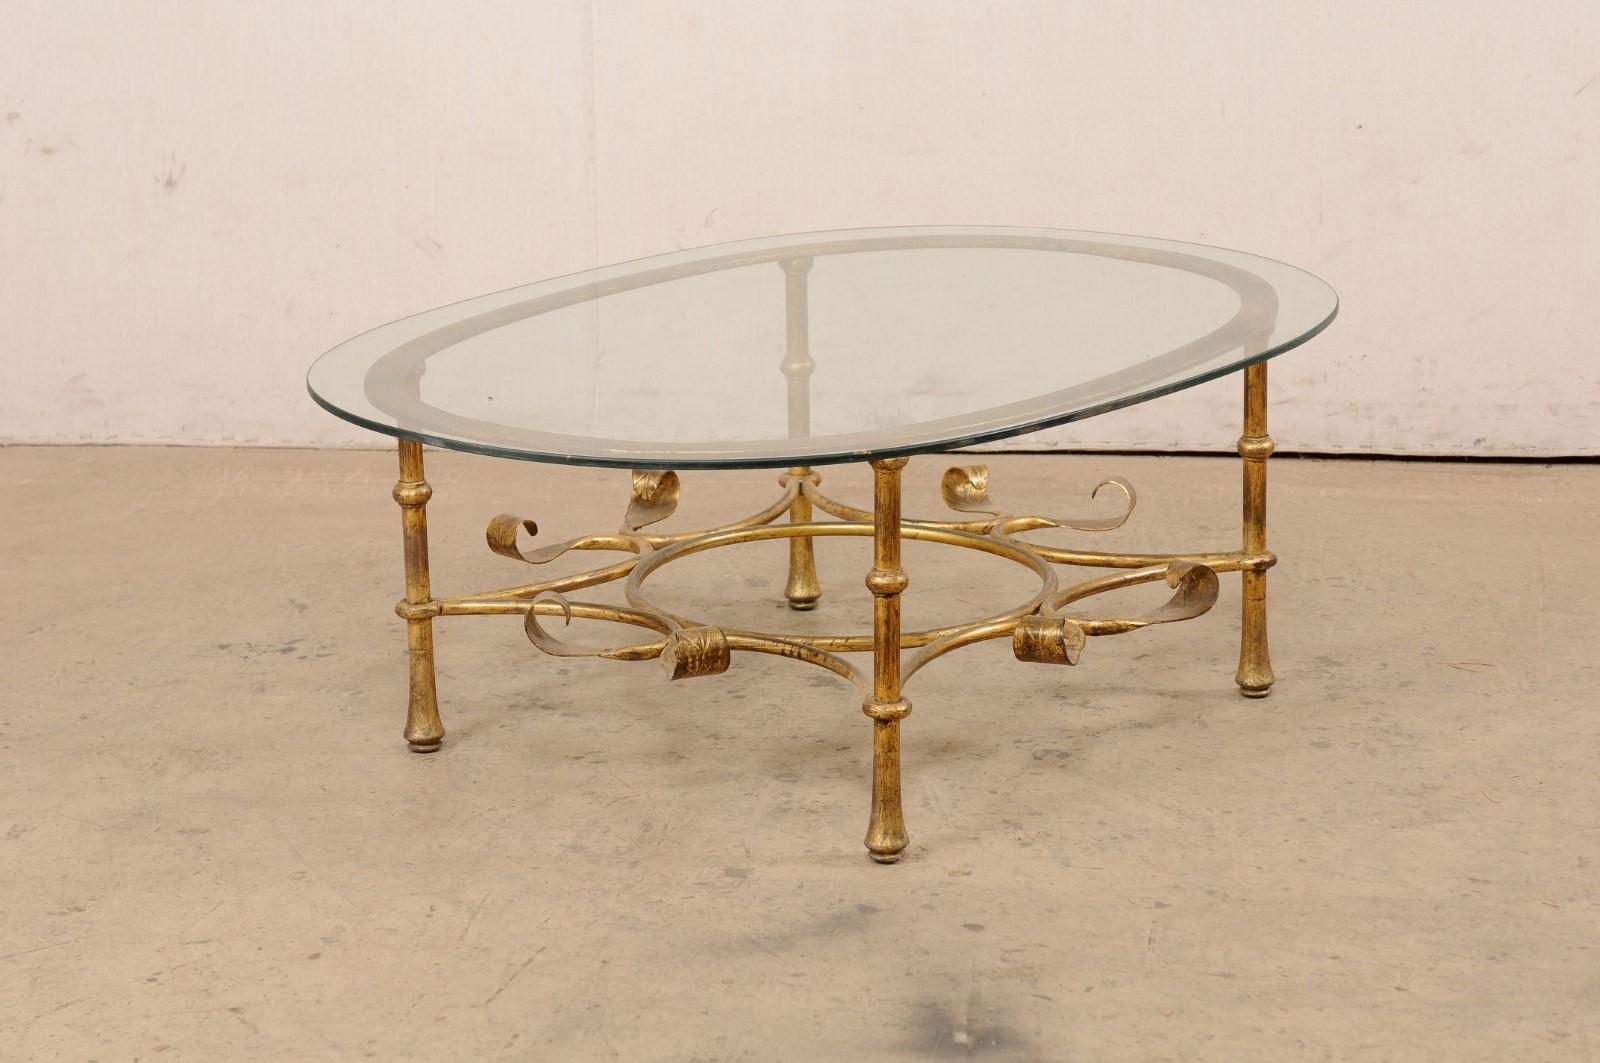 Spanish Oval Glass-Top Table with Iron Base (Gold Finish), Mid 20th C. 5